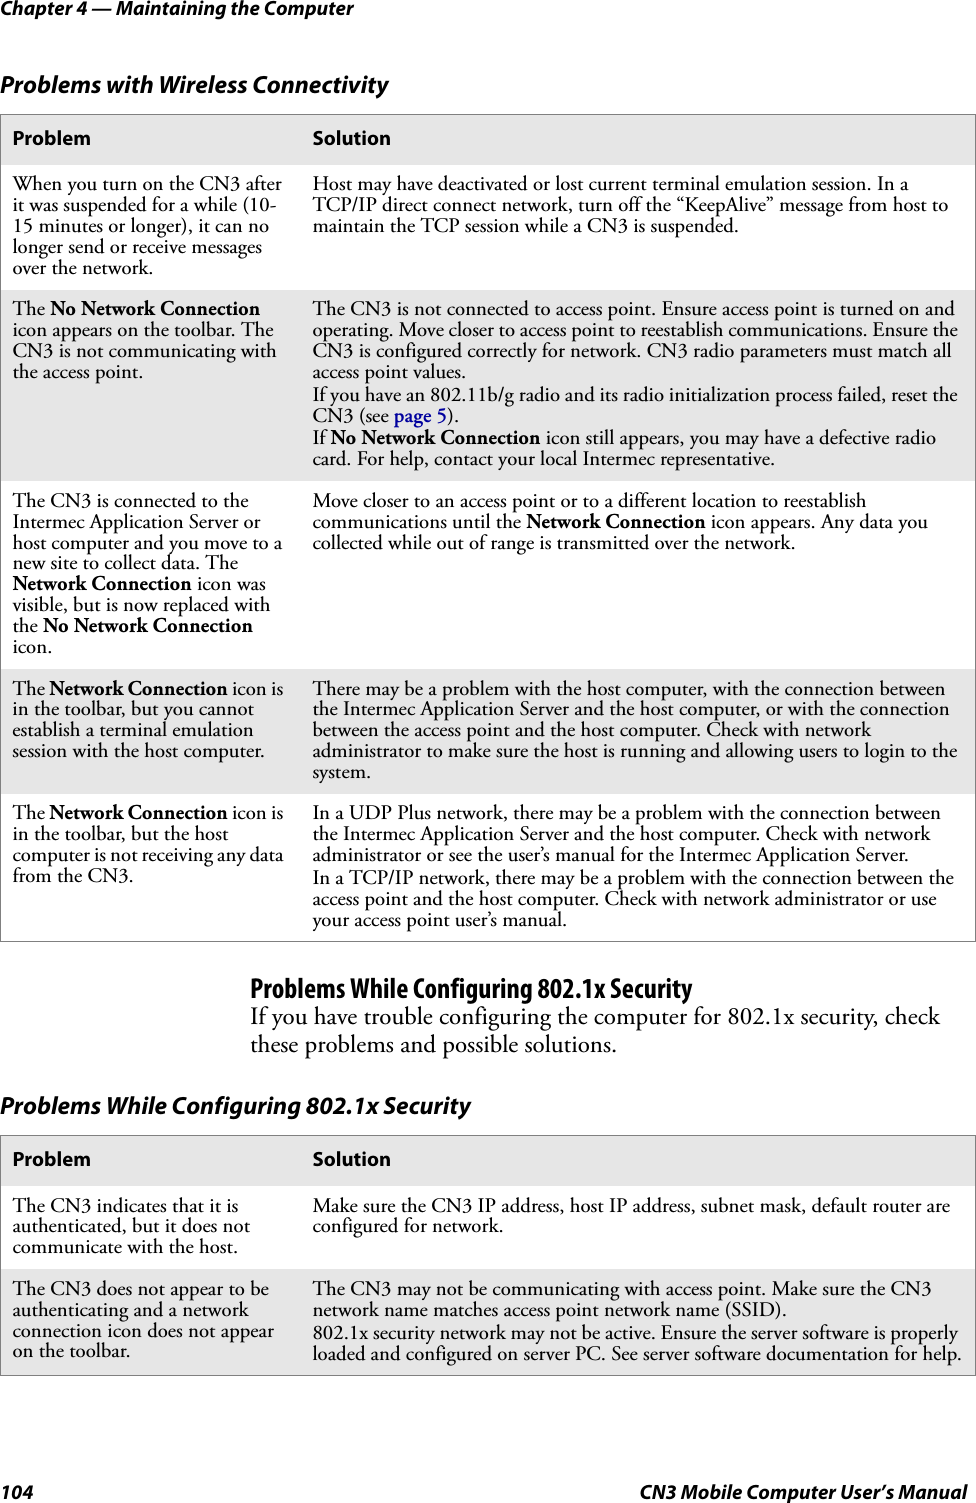 Chapter 4 — Maintaining the Computer104 CN3 Mobile Computer User’s ManualProblems While Configuring 802.1x SecurityIf you have trouble configuring the computer for 802.1x security, check these problems and possible solutions.Problems with Wireless ConnectivityProblem SolutionWhen you turn on the CN3 after it was suspended for a while (10-15 minutes or longer), it can no longer send or receive messages over the network.Host may have deactivated or lost current terminal emulation session. In a TCP/IP direct connect network, turn off the “KeepAlive” message from host to maintain the TCP session while a CN3 is suspended.The No Network Connection icon appears on the toolbar. The CN3 is not communicating with the access point.The CN3 is not connected to access point. Ensure access point is turned on and operating. Move closer to access point to reestablish communications. Ensure the CN3 is configured correctly for network. CN3 radio parameters must match all access point values. If you have an 802.11b/g radio and its radio initialization process failed, reset the CN3 (see page 5).If No Network Connection icon still appears, you may have a defective radio card. For help, contact your local Intermec representative.The CN3 is connected to the Intermec Application Server or host computer and you move to a new site to collect data. The Network Connection icon was visible, but is now replaced with the No Network Connection icon.Move closer to an access point or to a different location to reestablish communications until the Network Connection icon appears. Any data you collected while out of range is transmitted over the network.The Network Connection icon is in the toolbar, but you cannot establish a terminal emulation session with the host computer.There may be a problem with the host computer, with the connection between the Intermec Application Server and the host computer, or with the connection between the access point and the host computer. Check with network administrator to make sure the host is running and allowing users to login to the system.The Network Connection icon is in the toolbar, but the host computer is not receiving any data from the CN3.In a UDP Plus network, there may be a problem with the connection between the Intermec Application Server and the host computer. Check with network administrator or see the user’s manual for the Intermec Application Server.In a TCP/IP network, there may be a problem with the connection between the access point and the host computer. Check with network administrator or use your access point user’s manual.Problems While Configuring 802.1x SecurityProblem SolutionThe CN3 indicates that it is authenticated, but it does not communicate with the host.Make sure the CN3 IP address, host IP address, subnet mask, default router are configured for network.The CN3 does not appear to be authenticating and a network connection icon does not appear on the toolbar.The CN3 may not be communicating with access point. Make sure the CN3 network name matches access point network name (SSID).802.1x security network may not be active. Ensure the server software is properly loaded and configured on server PC. See server software documentation for help.